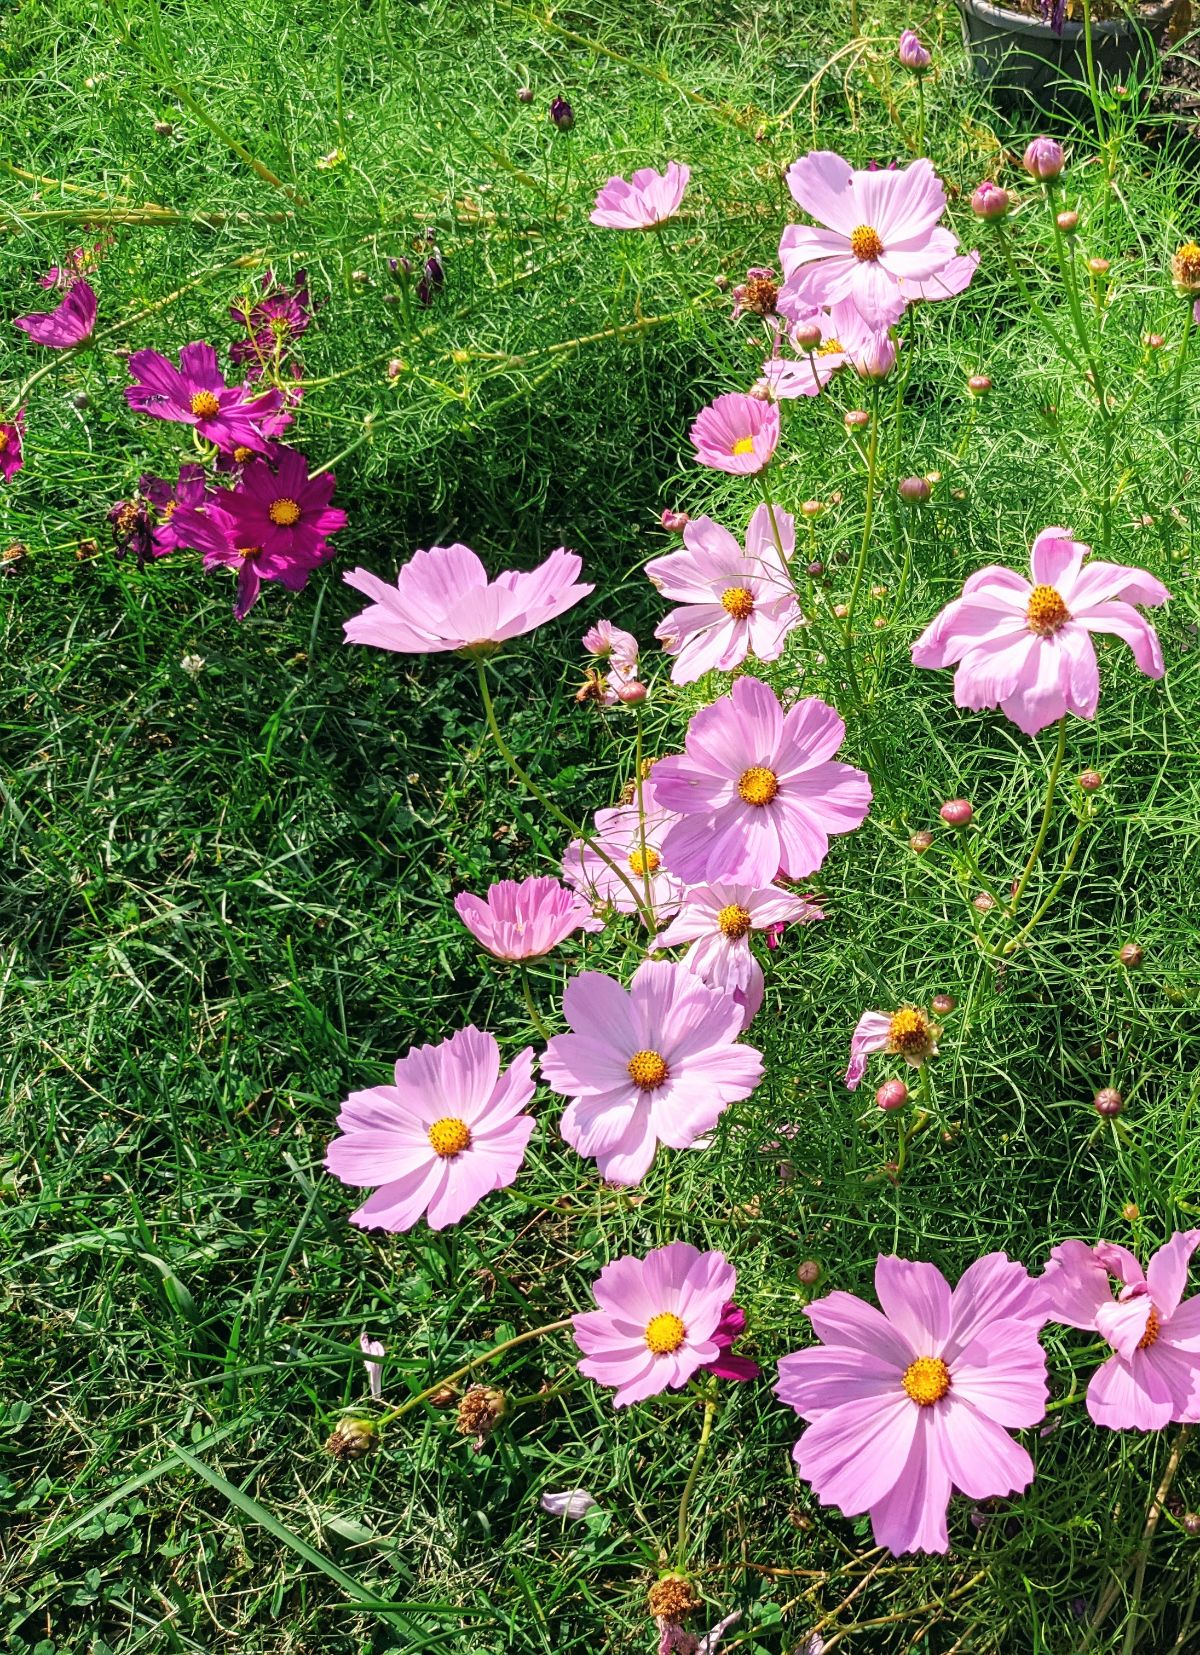 Tall purple and pinkish lavender cosmos in our 2021 garden